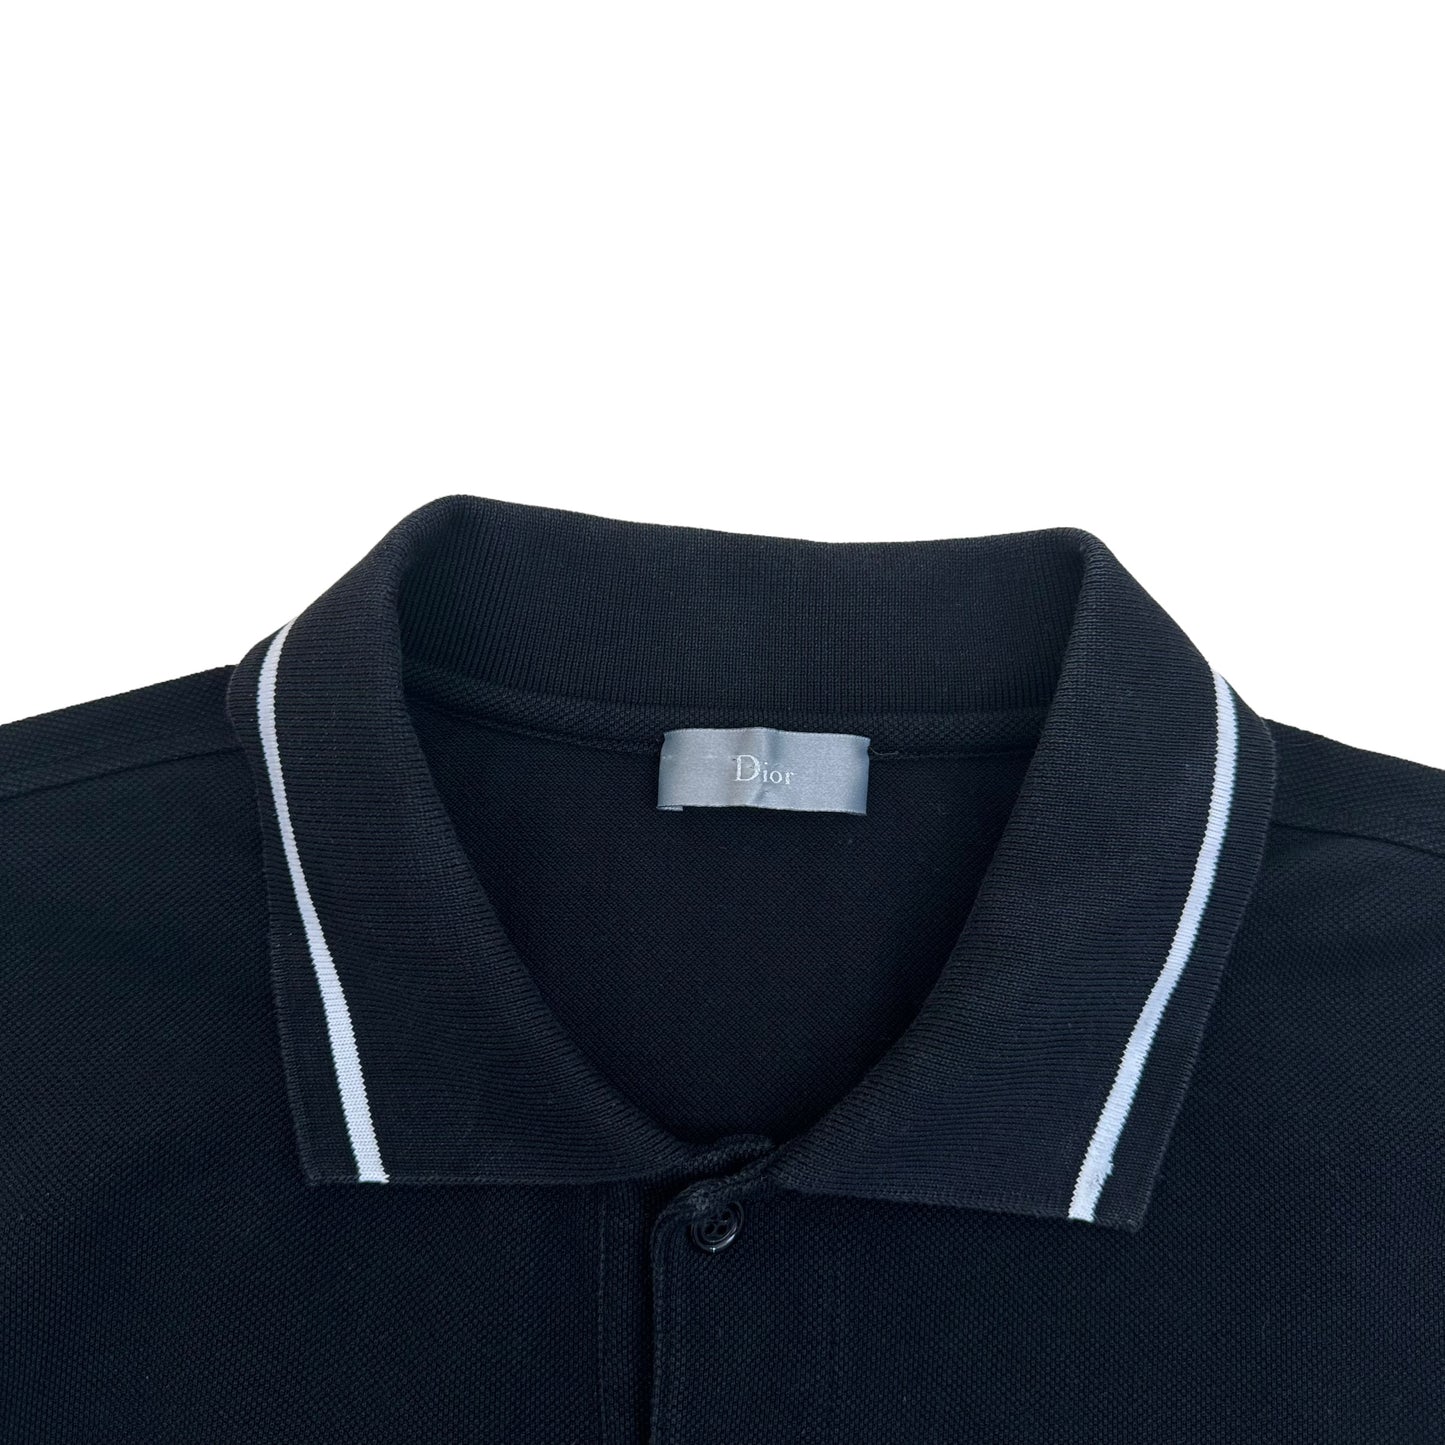 DIOR EMBOSSED BEE POLO SHIRT BLACK XL